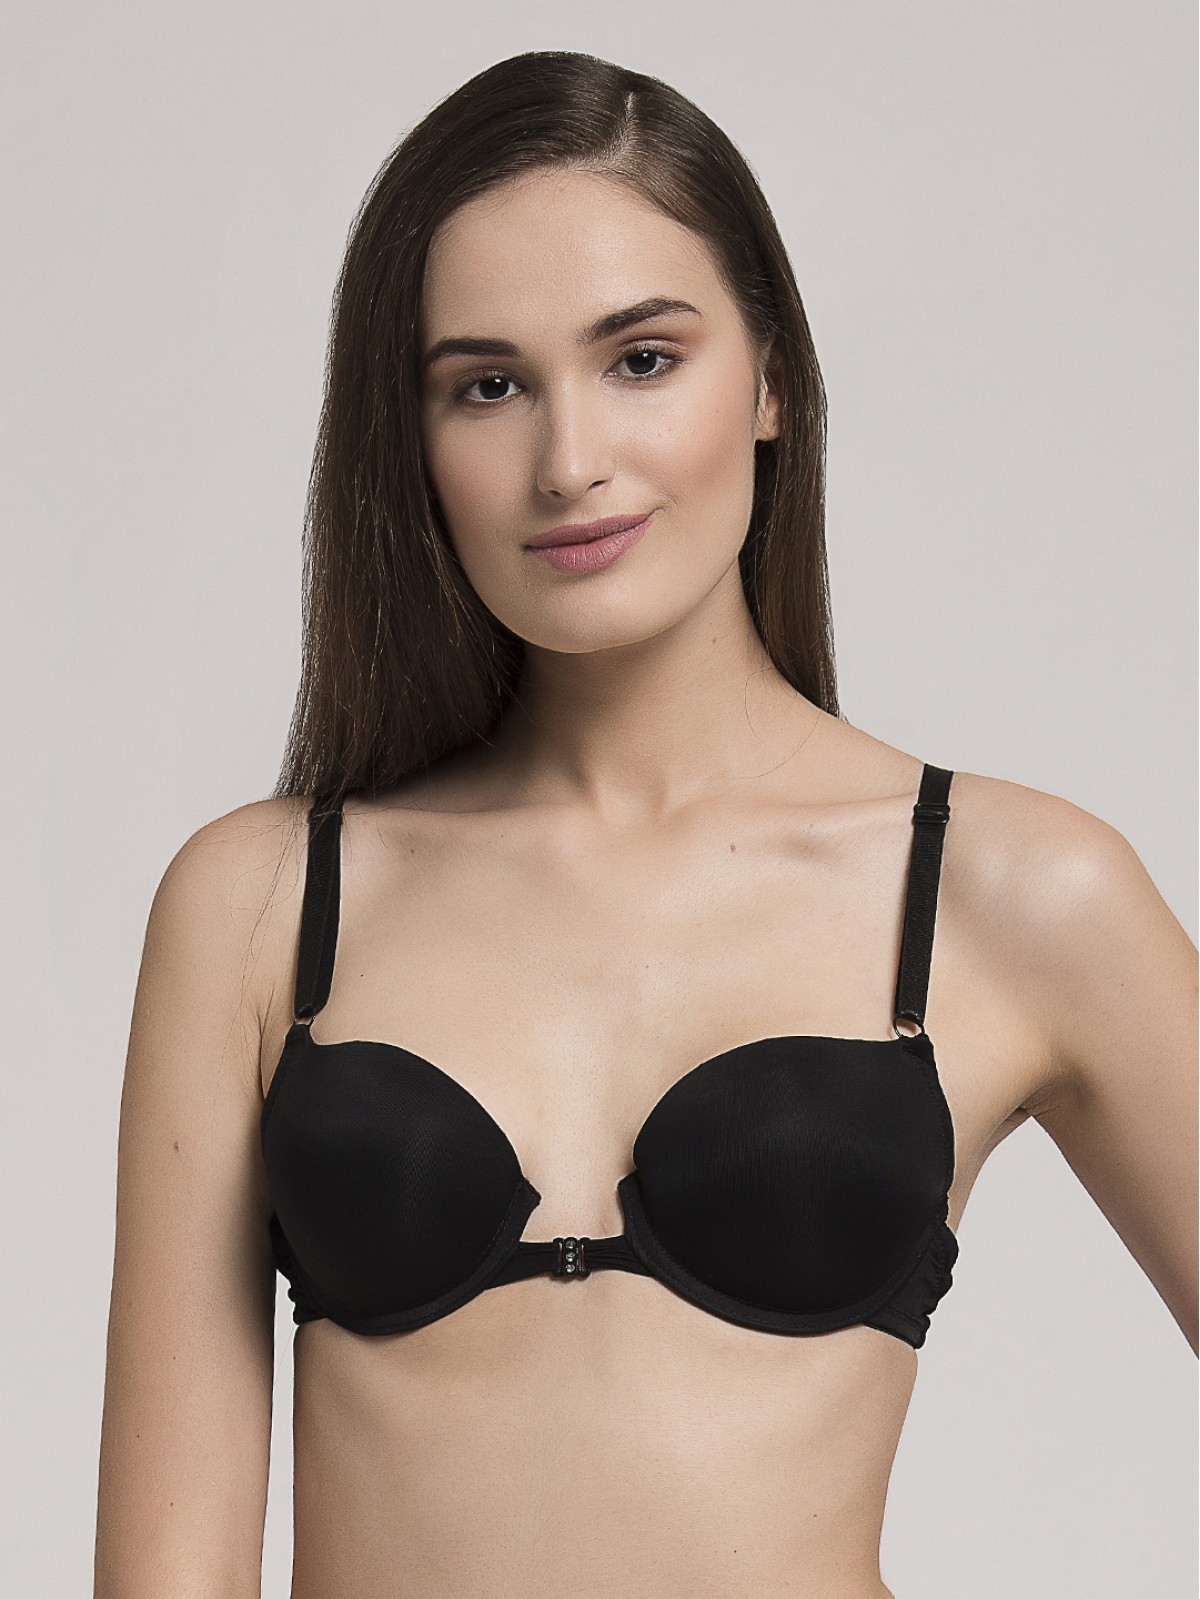 Sassy and Seductive Front Open Brassiere